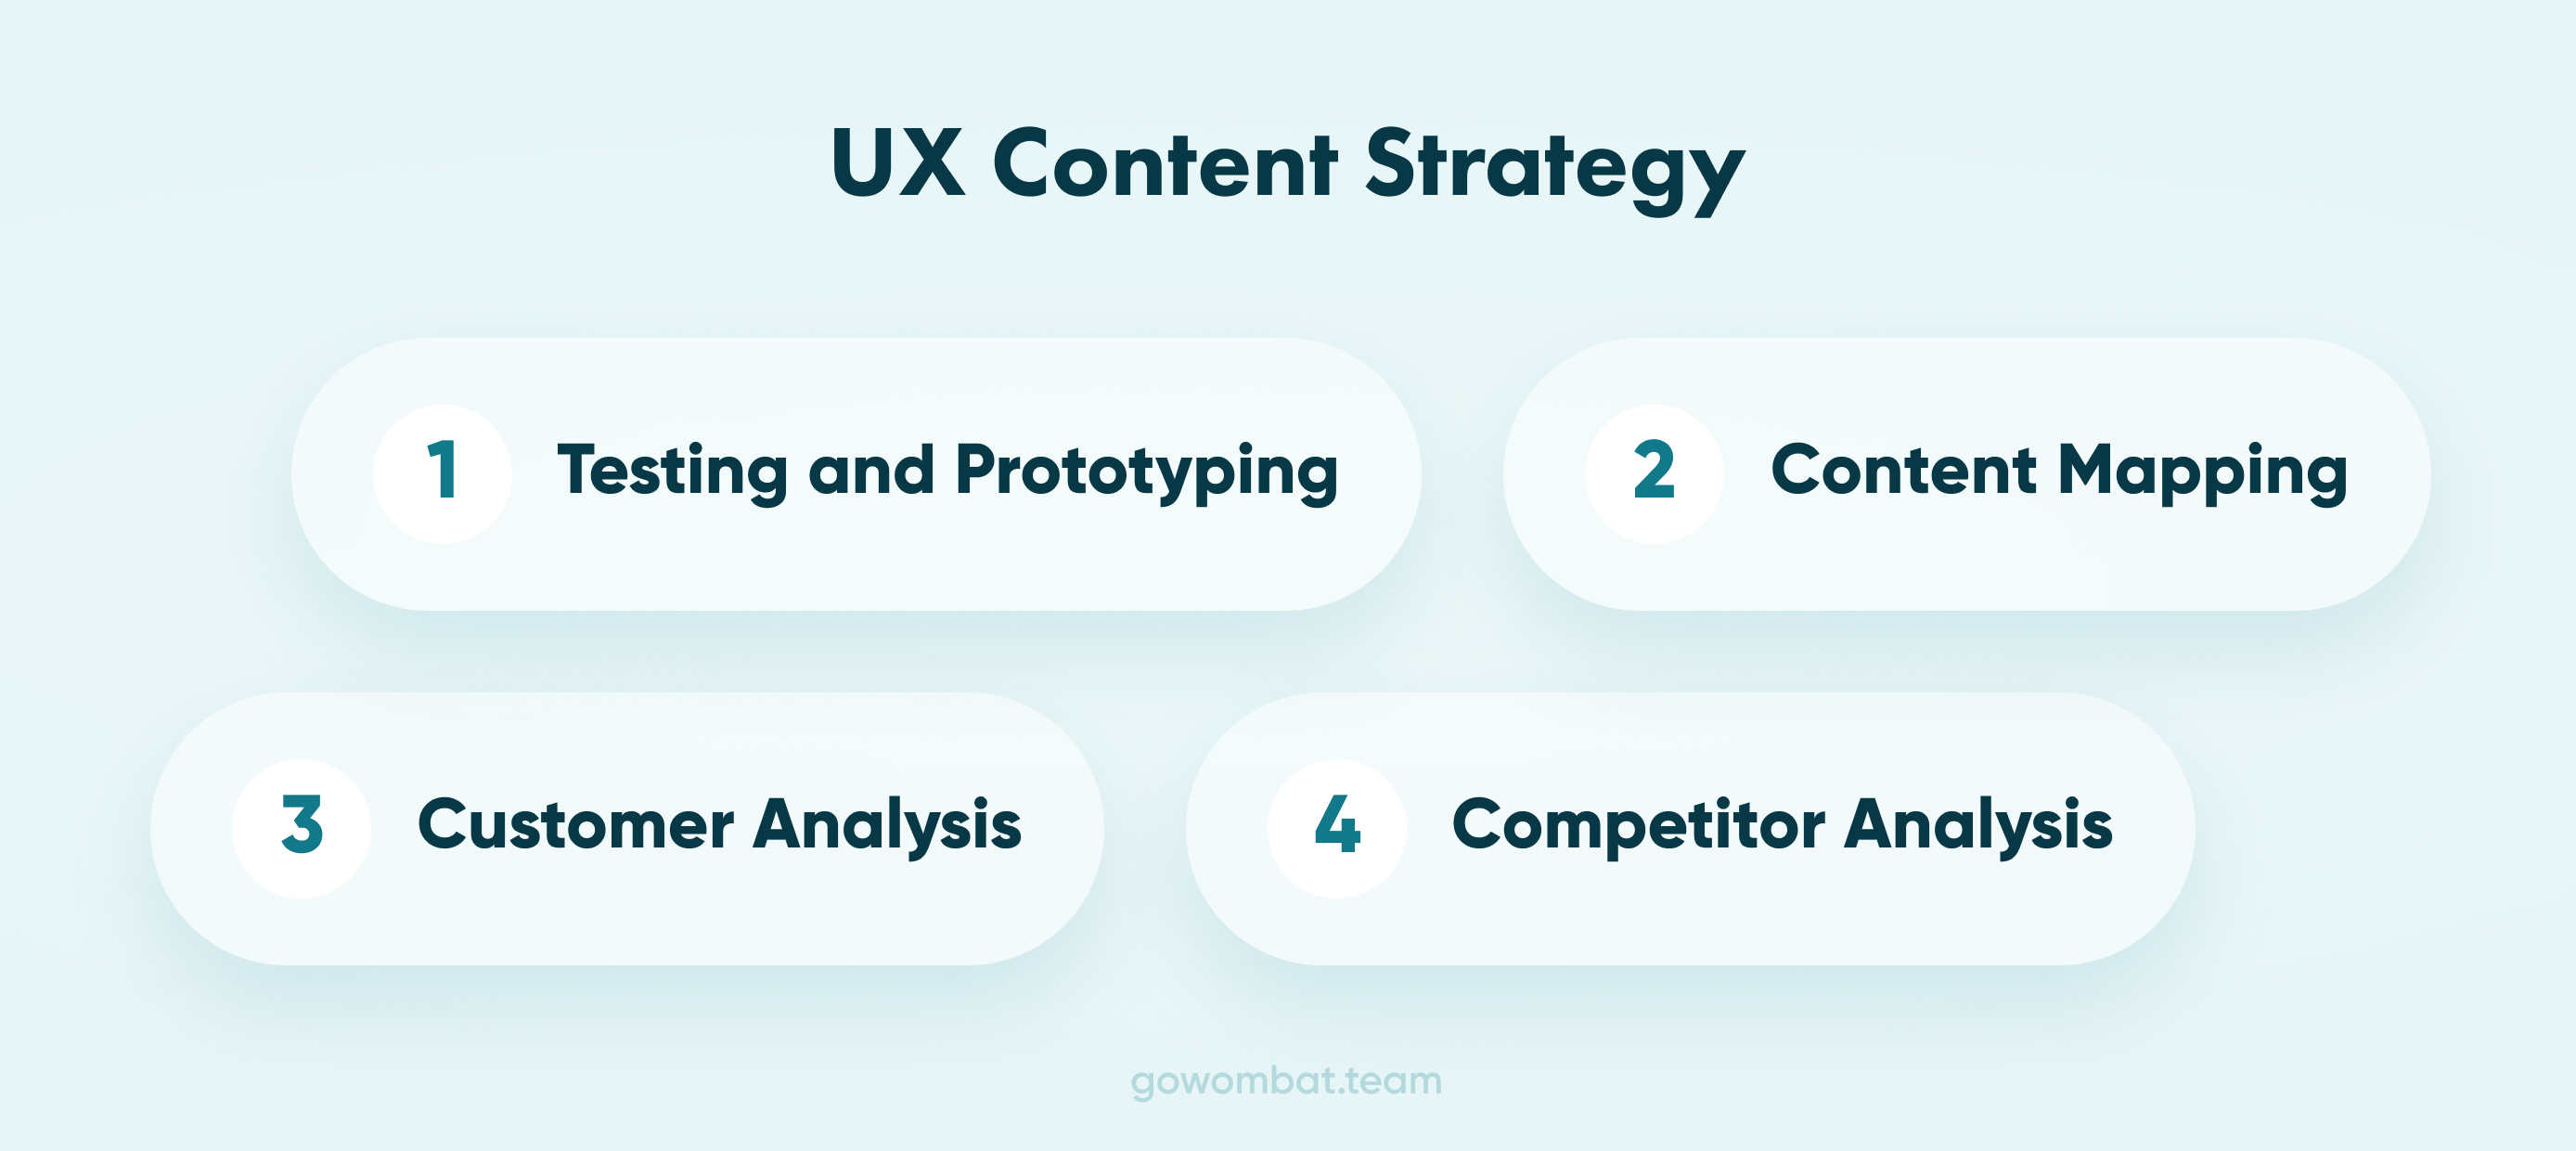 A simple breakdown of a UX Content Strategy.